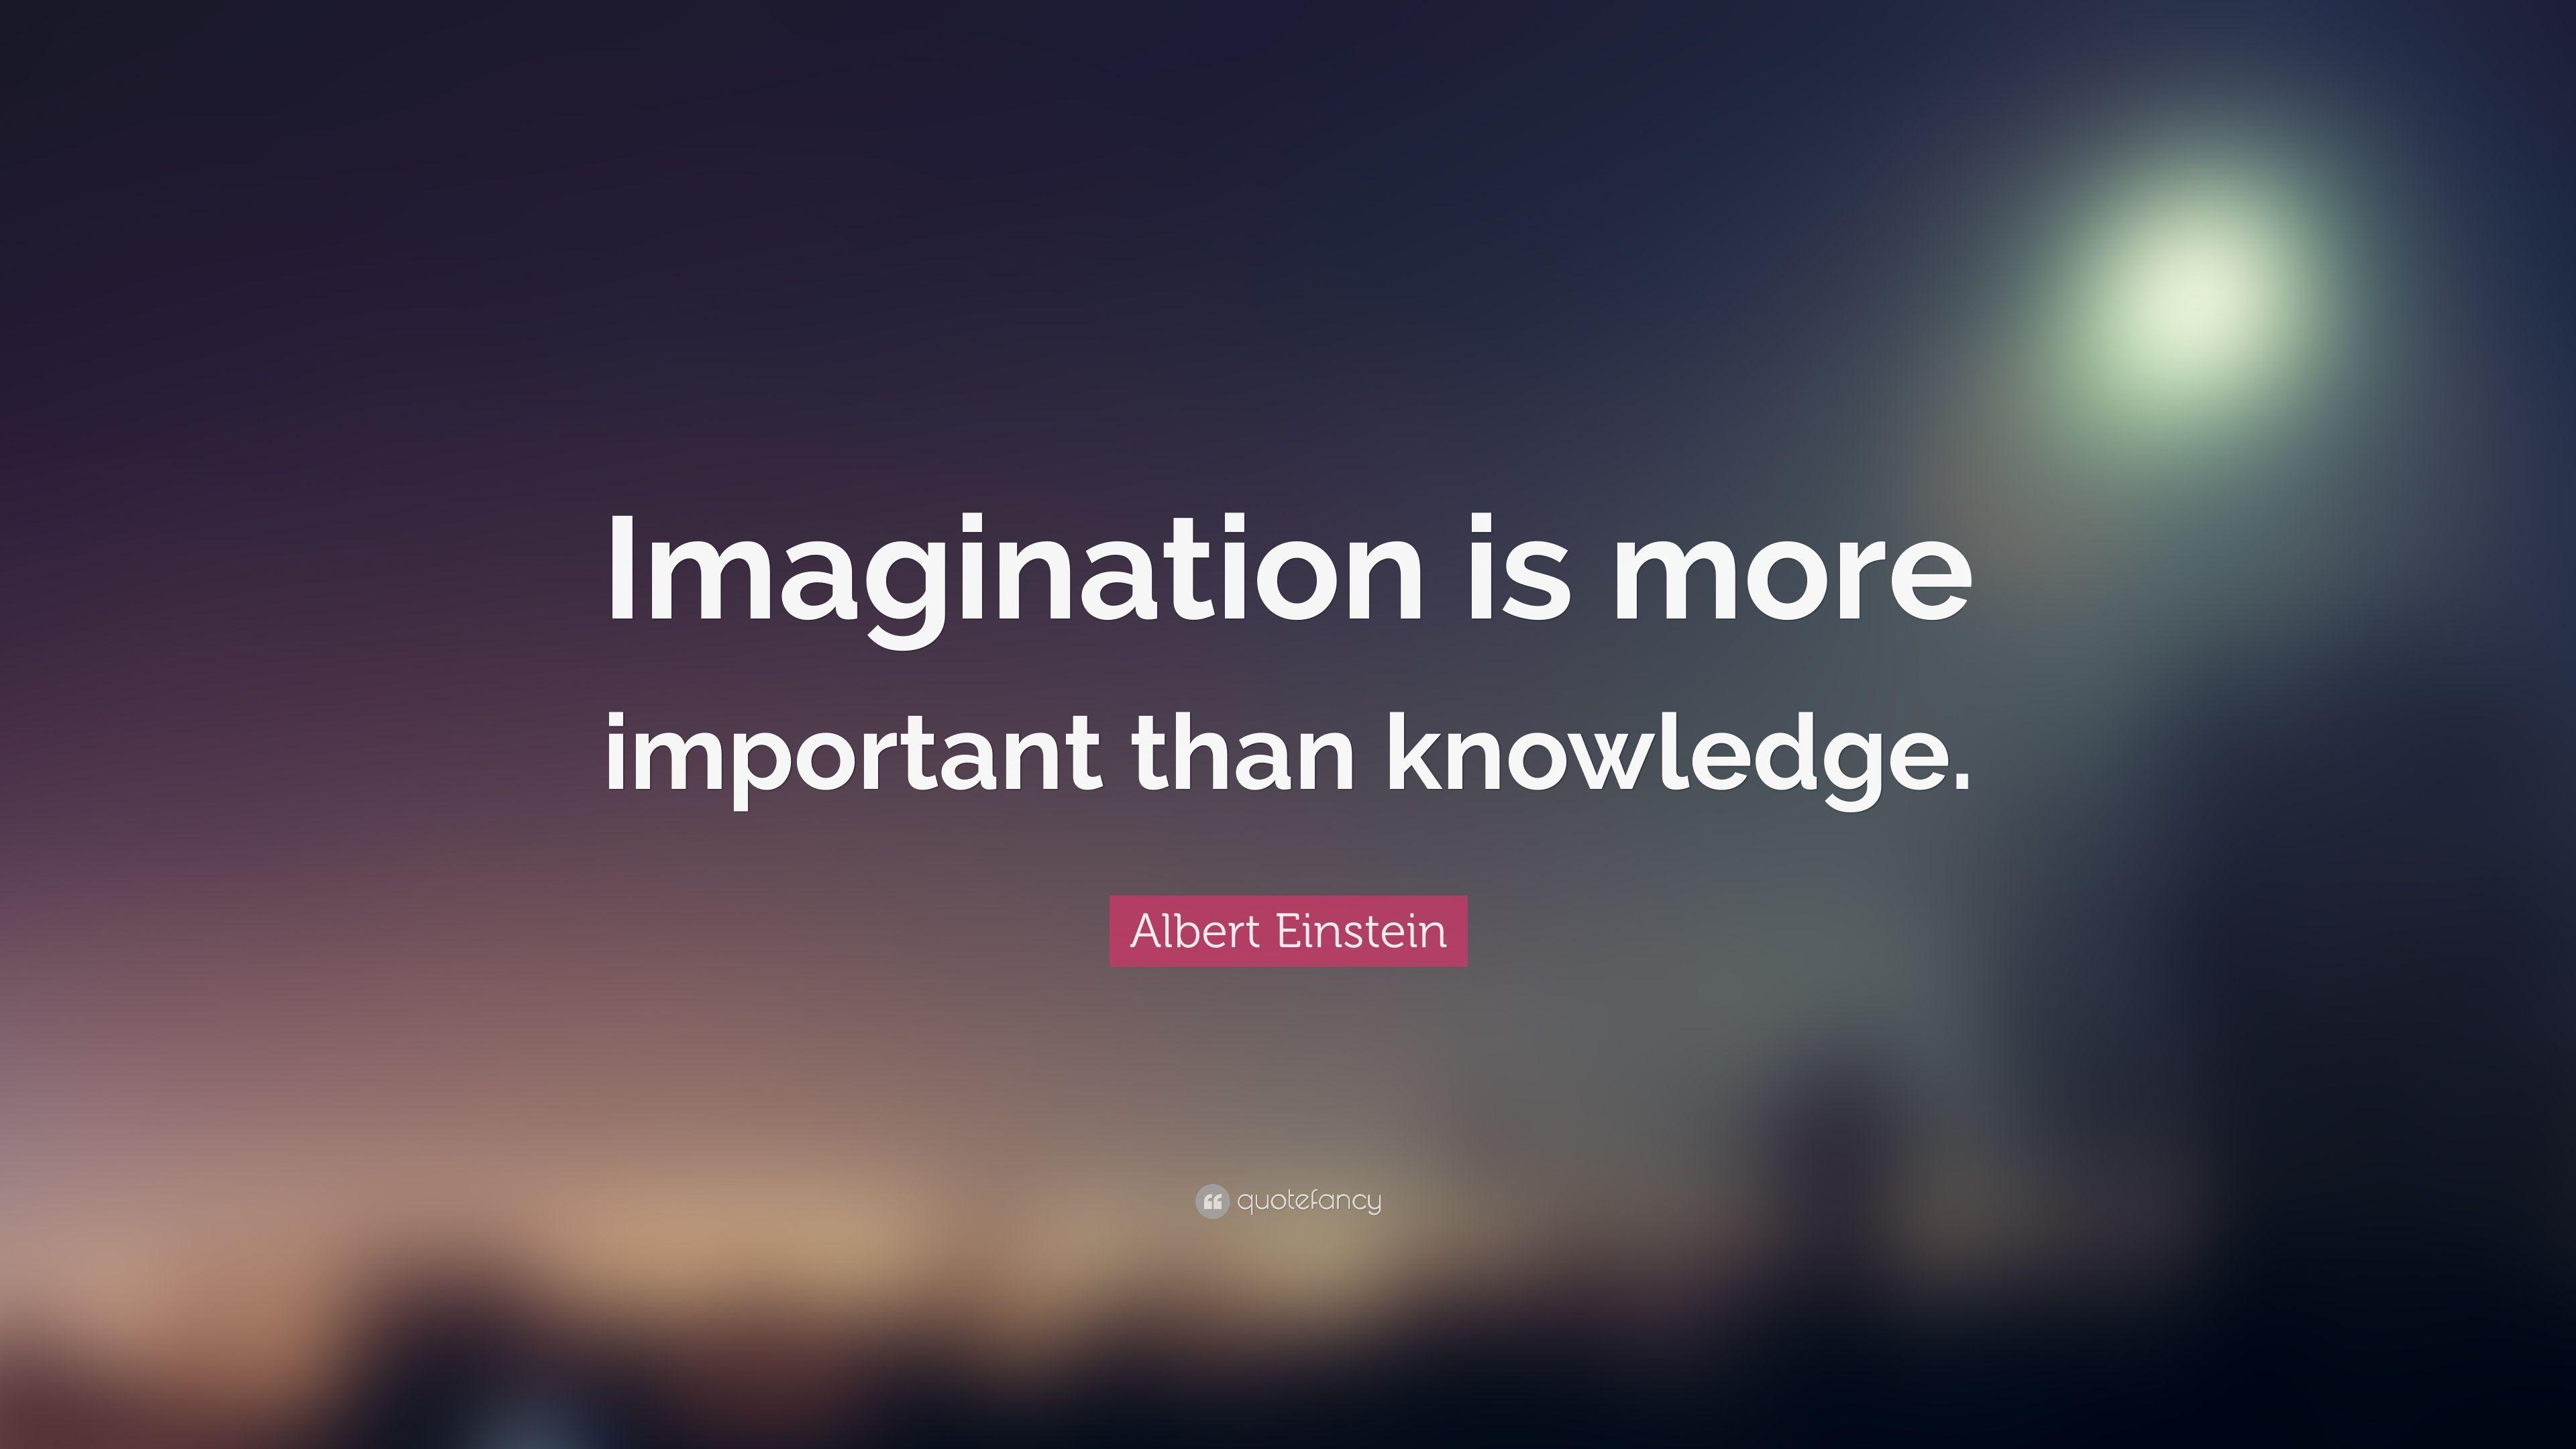 Albert Einstein Quote: “Imagination is more important than